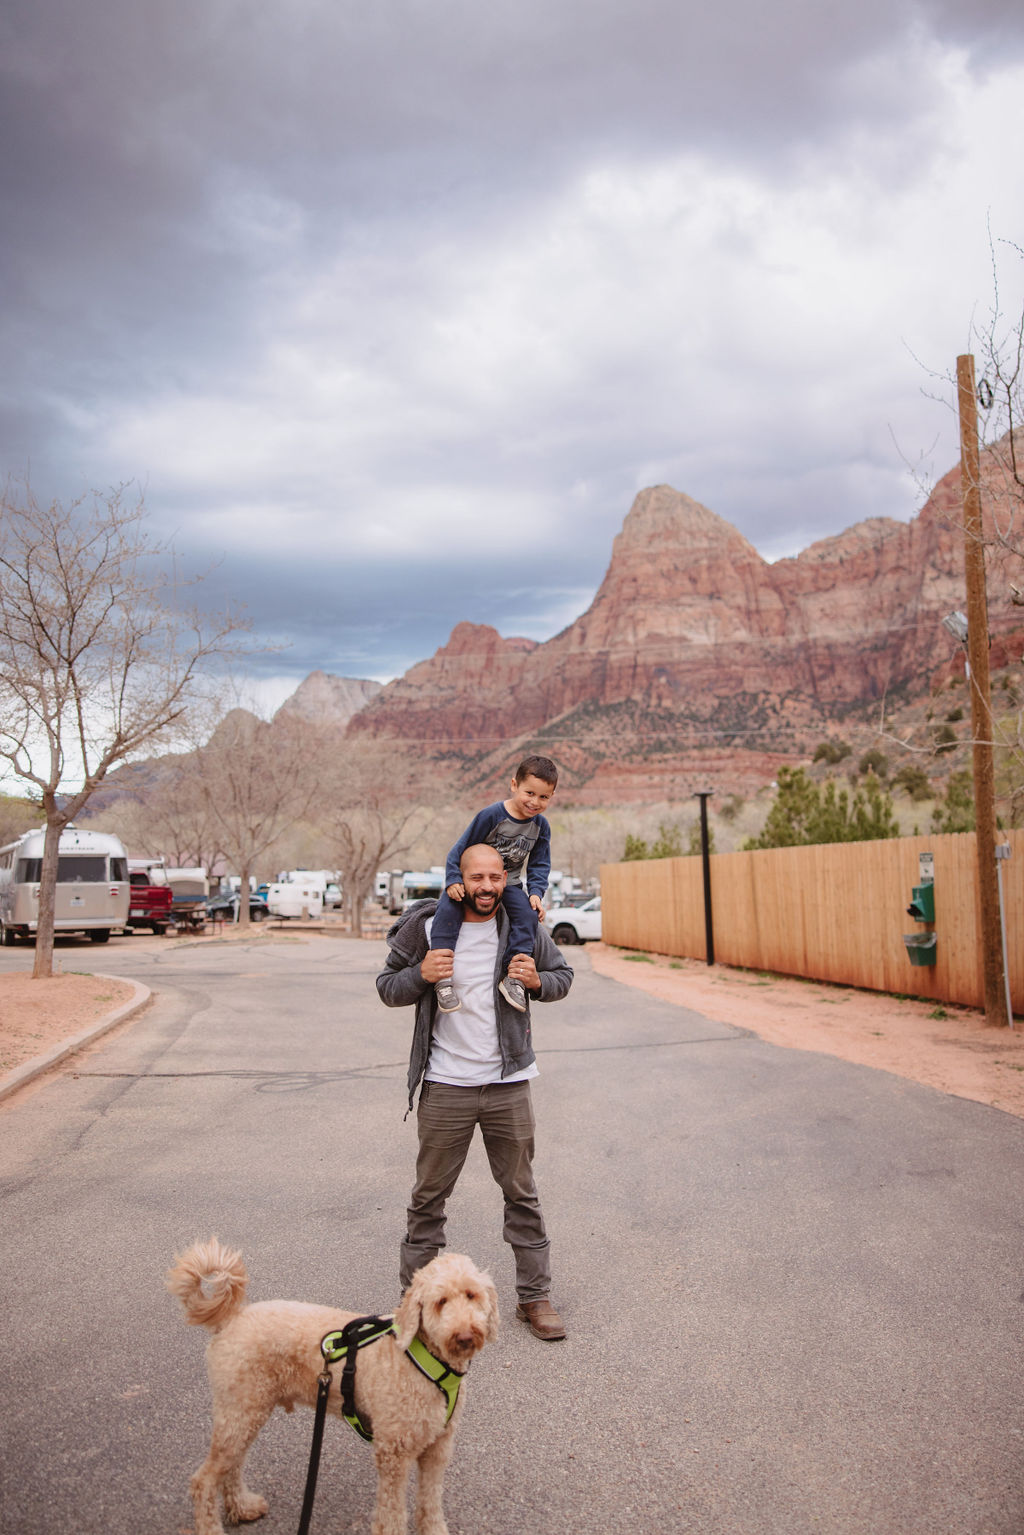 A man with a child on his shoulders and a dog on a leash walking on a road with red rock mountains in the background.